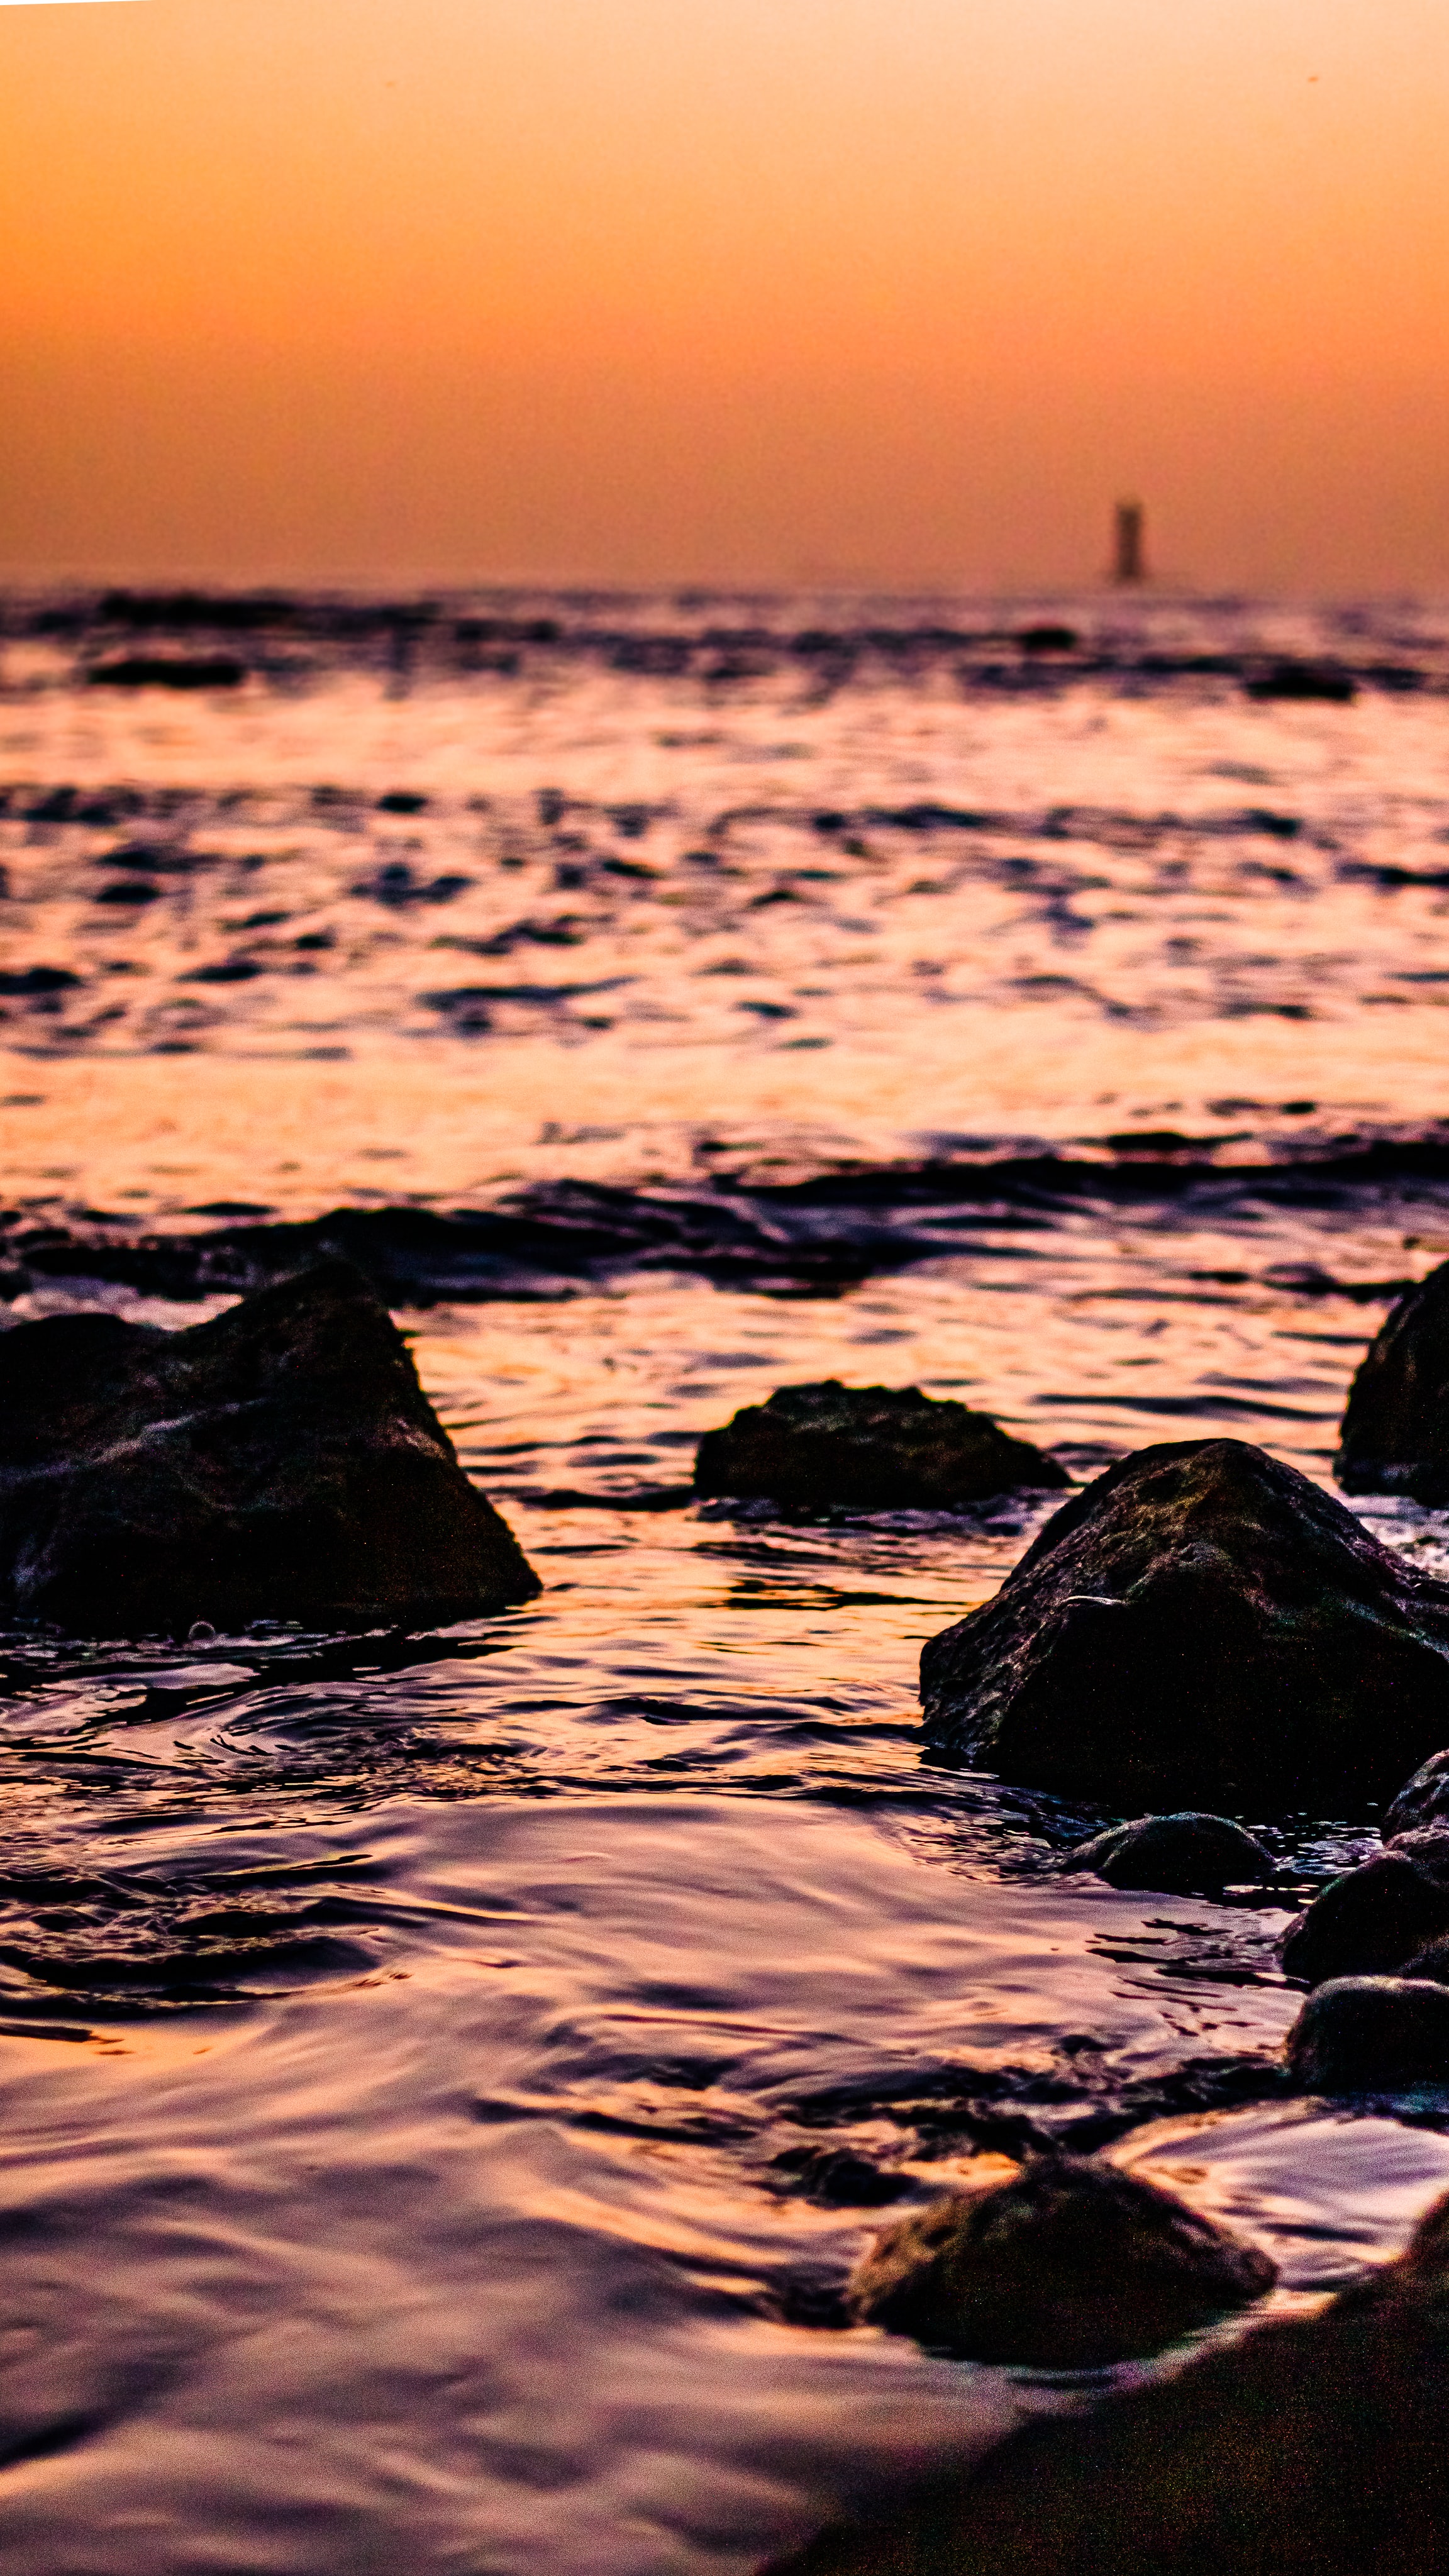 Windows Backgrounds nature, water, sunset, stones, waves